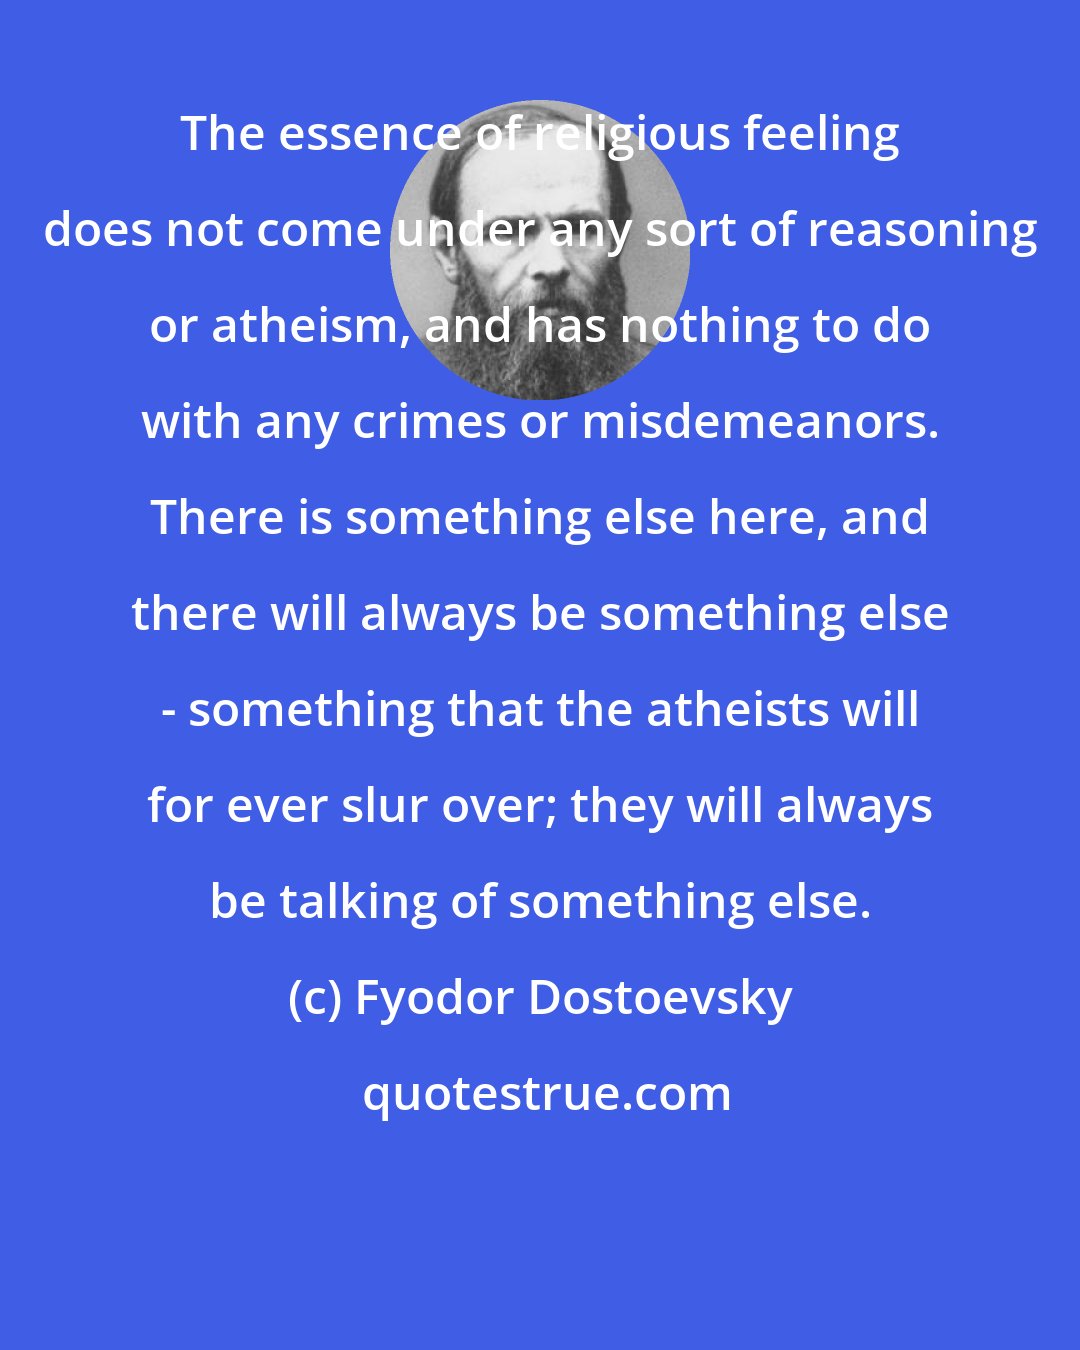 Fyodor Dostoevsky: The essence of religious feeling does not come under any sort of reasoning or atheism, and has nothing to do with any crimes or misdemeanors. There is something else here, and there will always be something else - something that the atheists will for ever slur over; they will always be talking of something else.